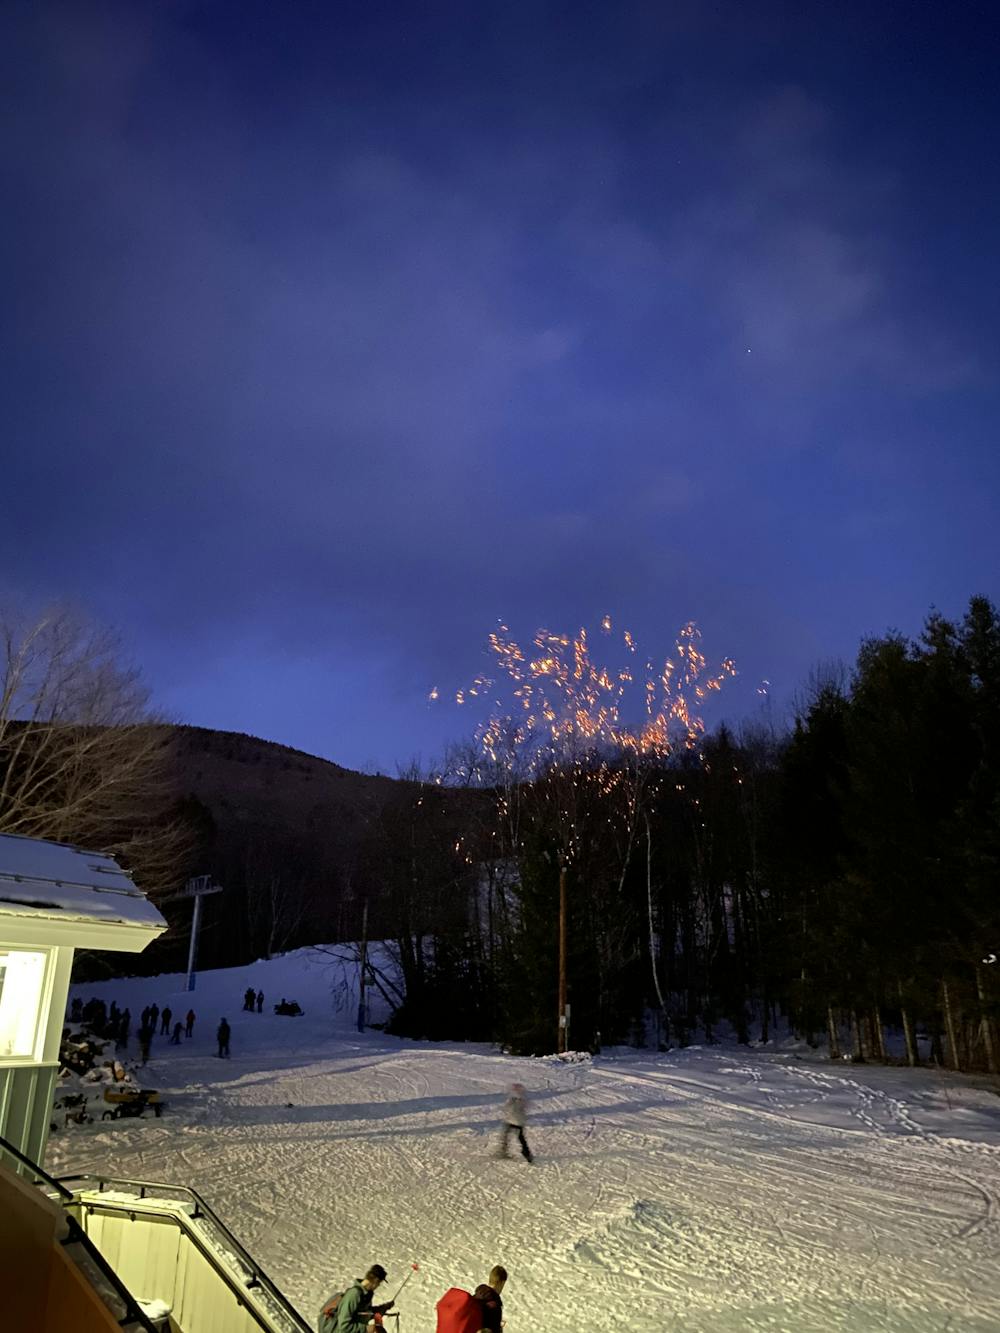 On Dec. 15 the Snowbowl held its grand opening for night skiing. The event included fireworks, live music, and other après-ski festivities. Photo by Violet Gordon '26.5.